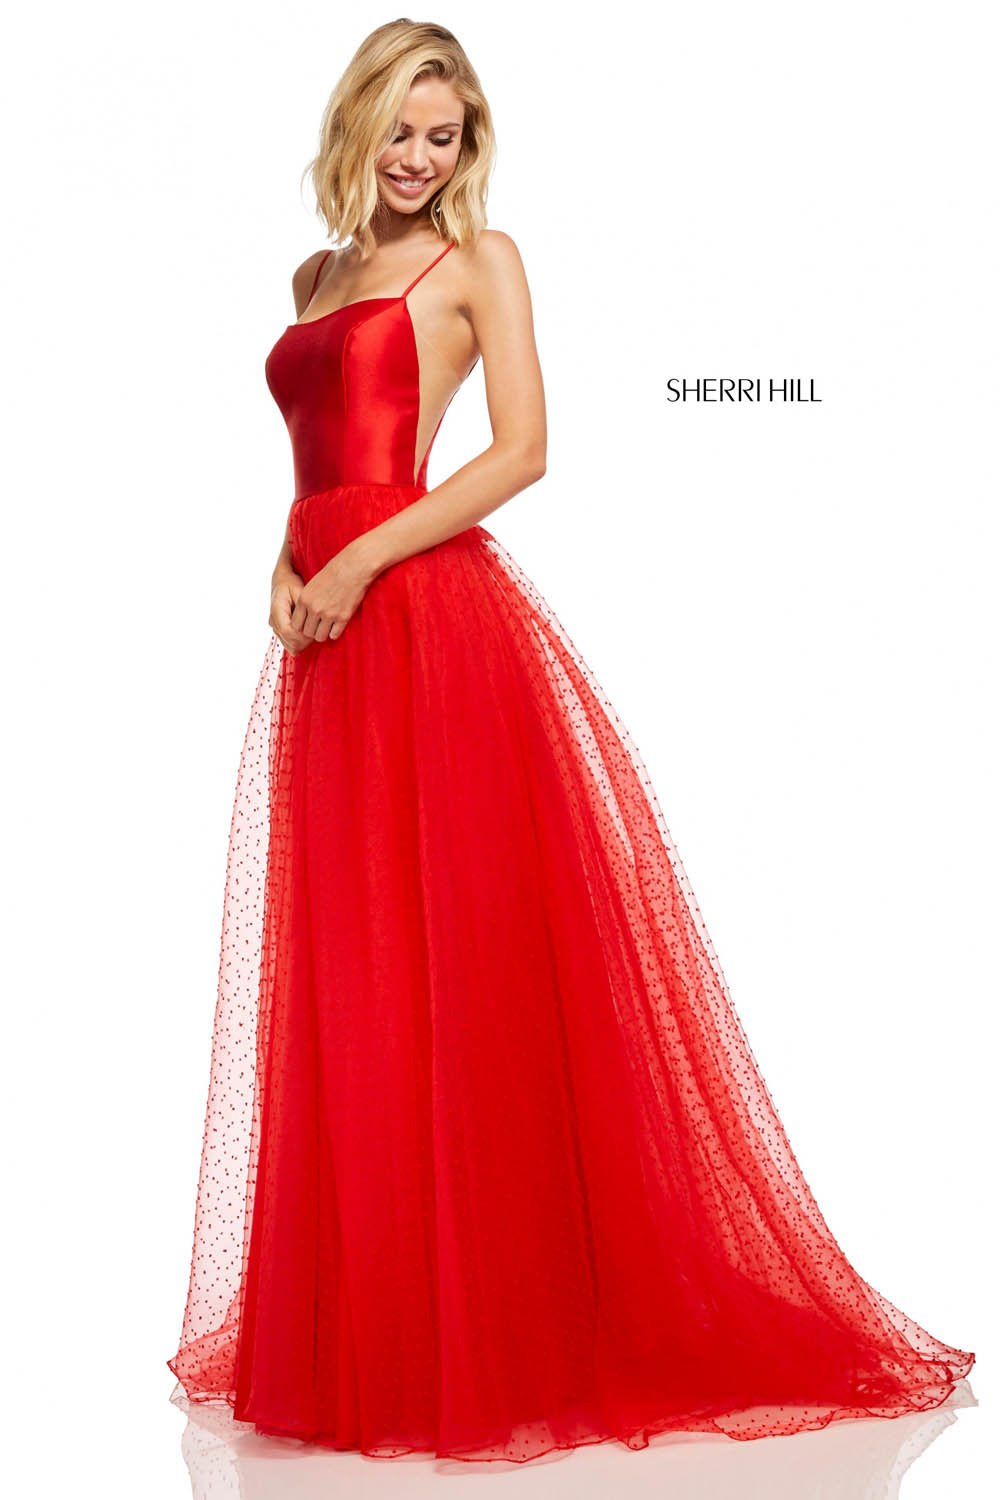 Sherri Hill 52639 dress images in these colors: Red, Ivory, Blush, Coral, Black, Navy.